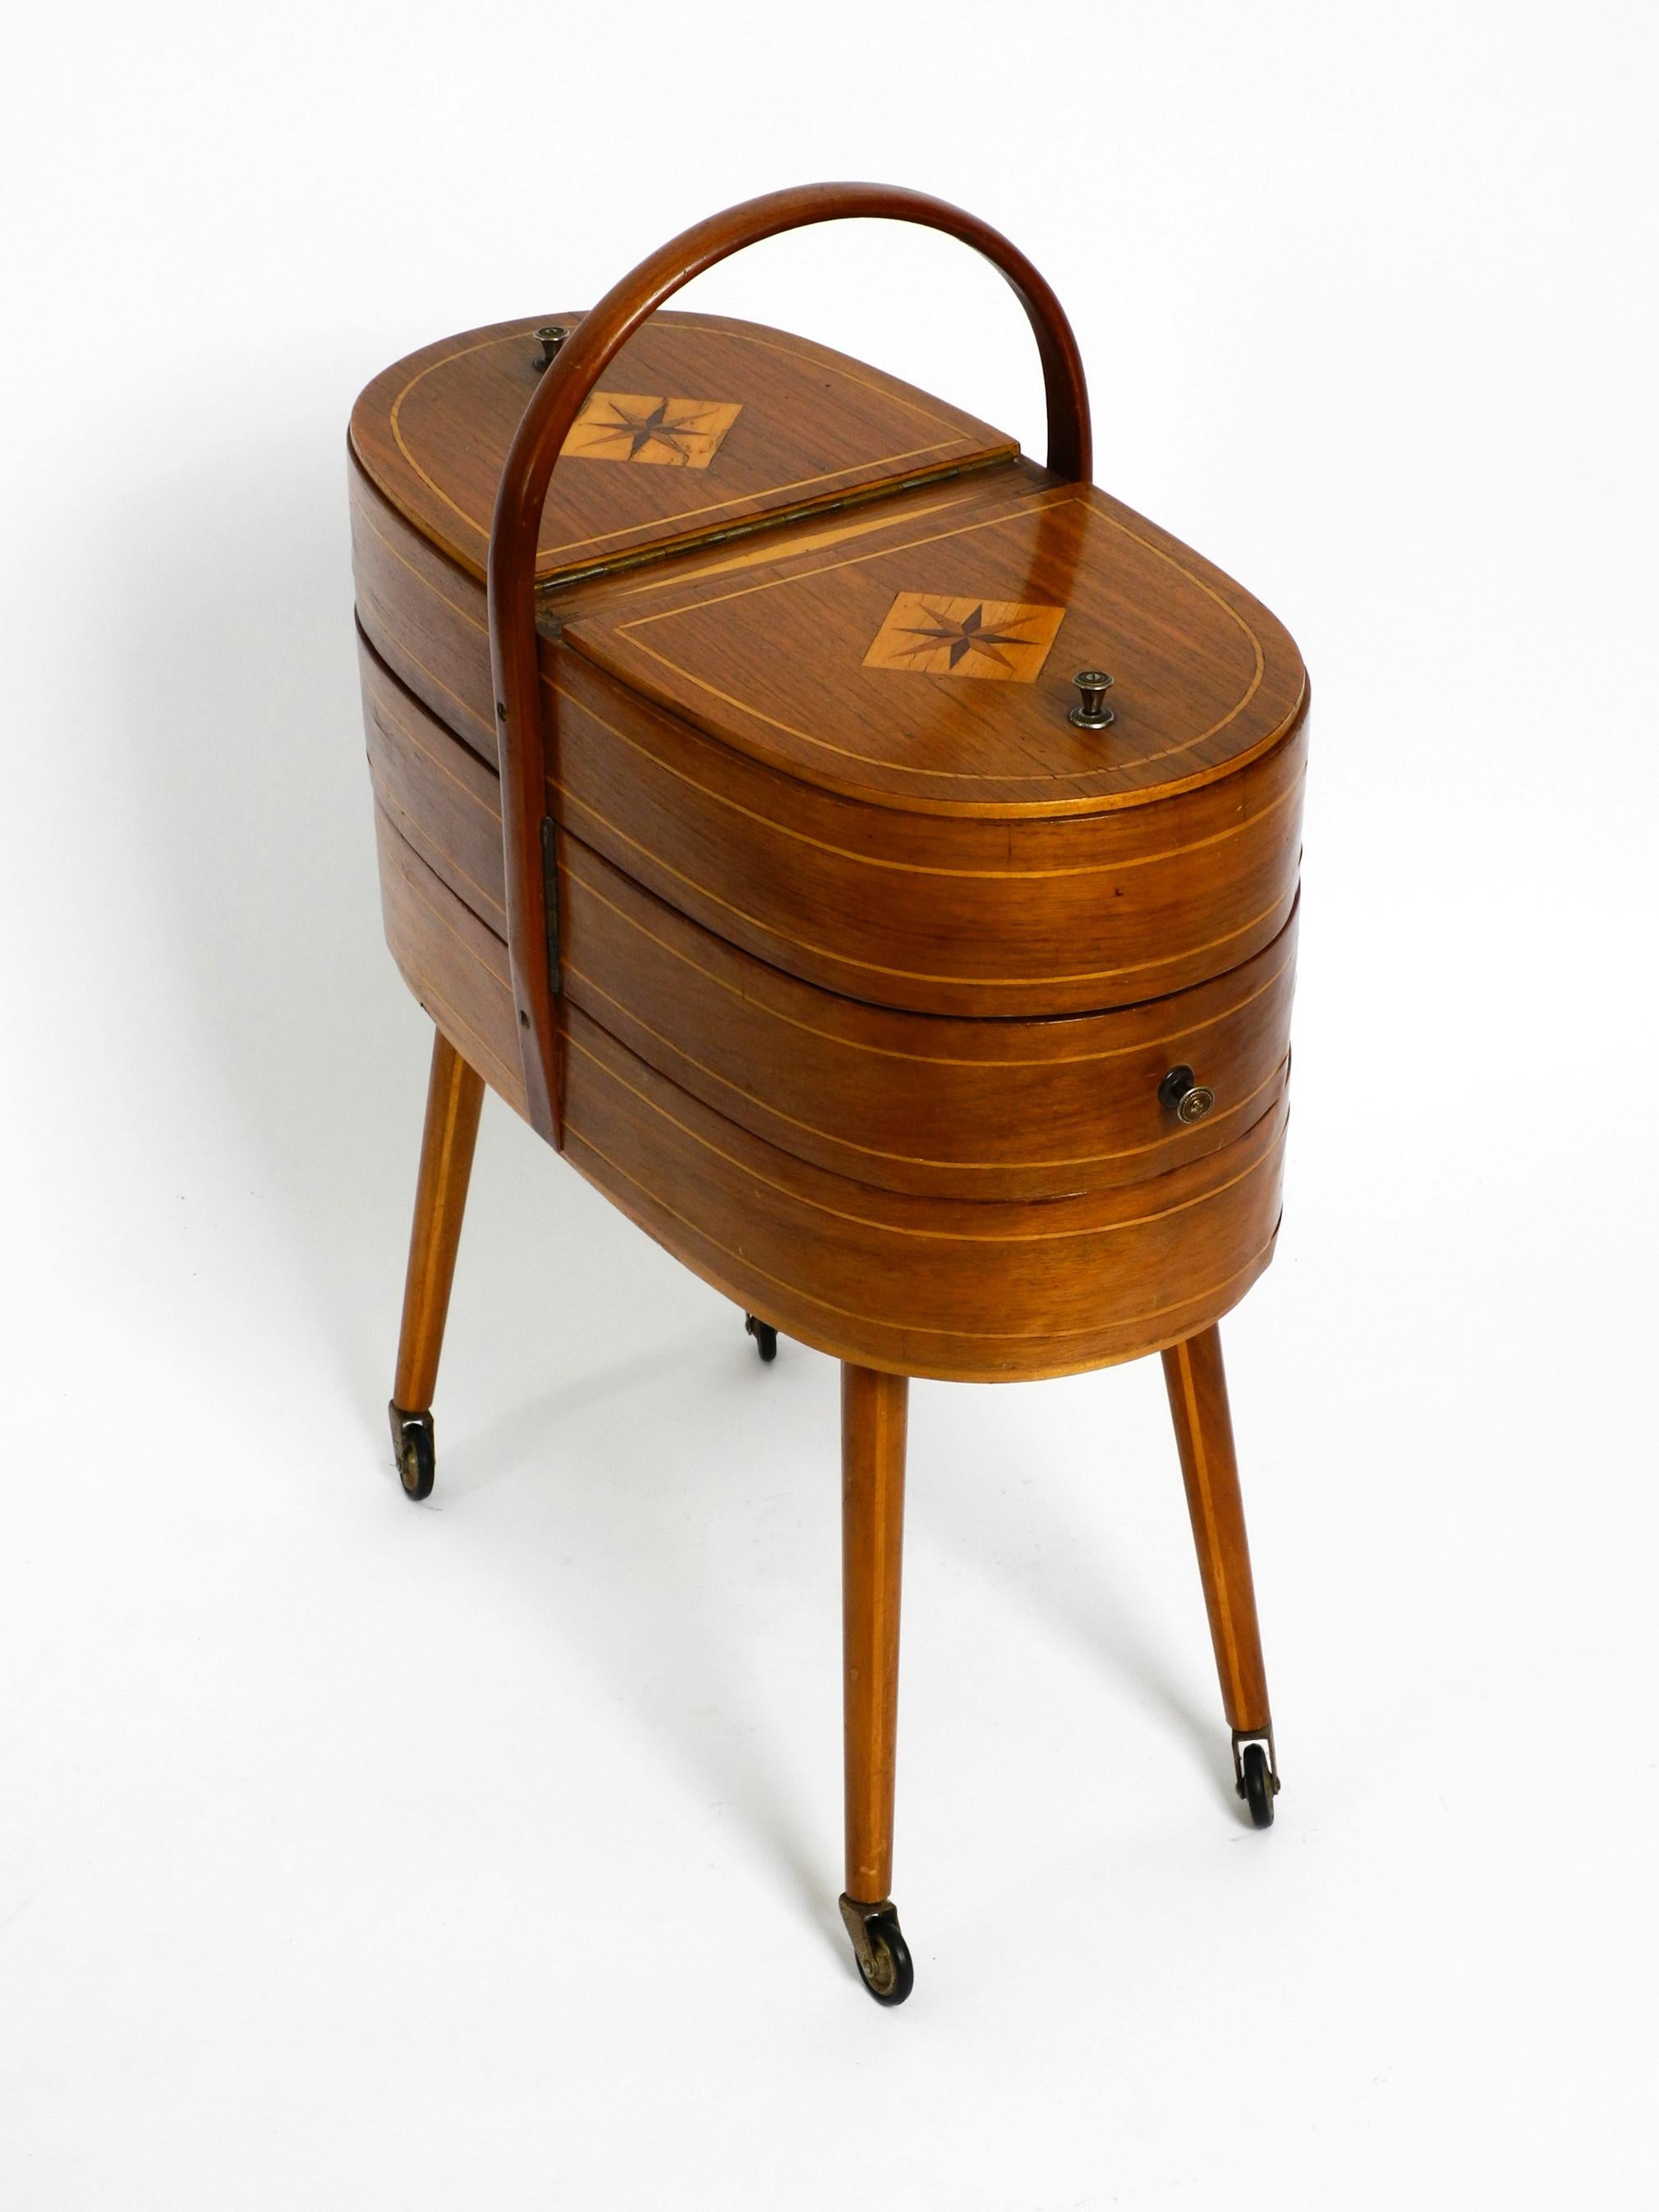 Mid-20th Century Midcentury Sewing Box with Teak Veneer Marquetry and Many Compartments